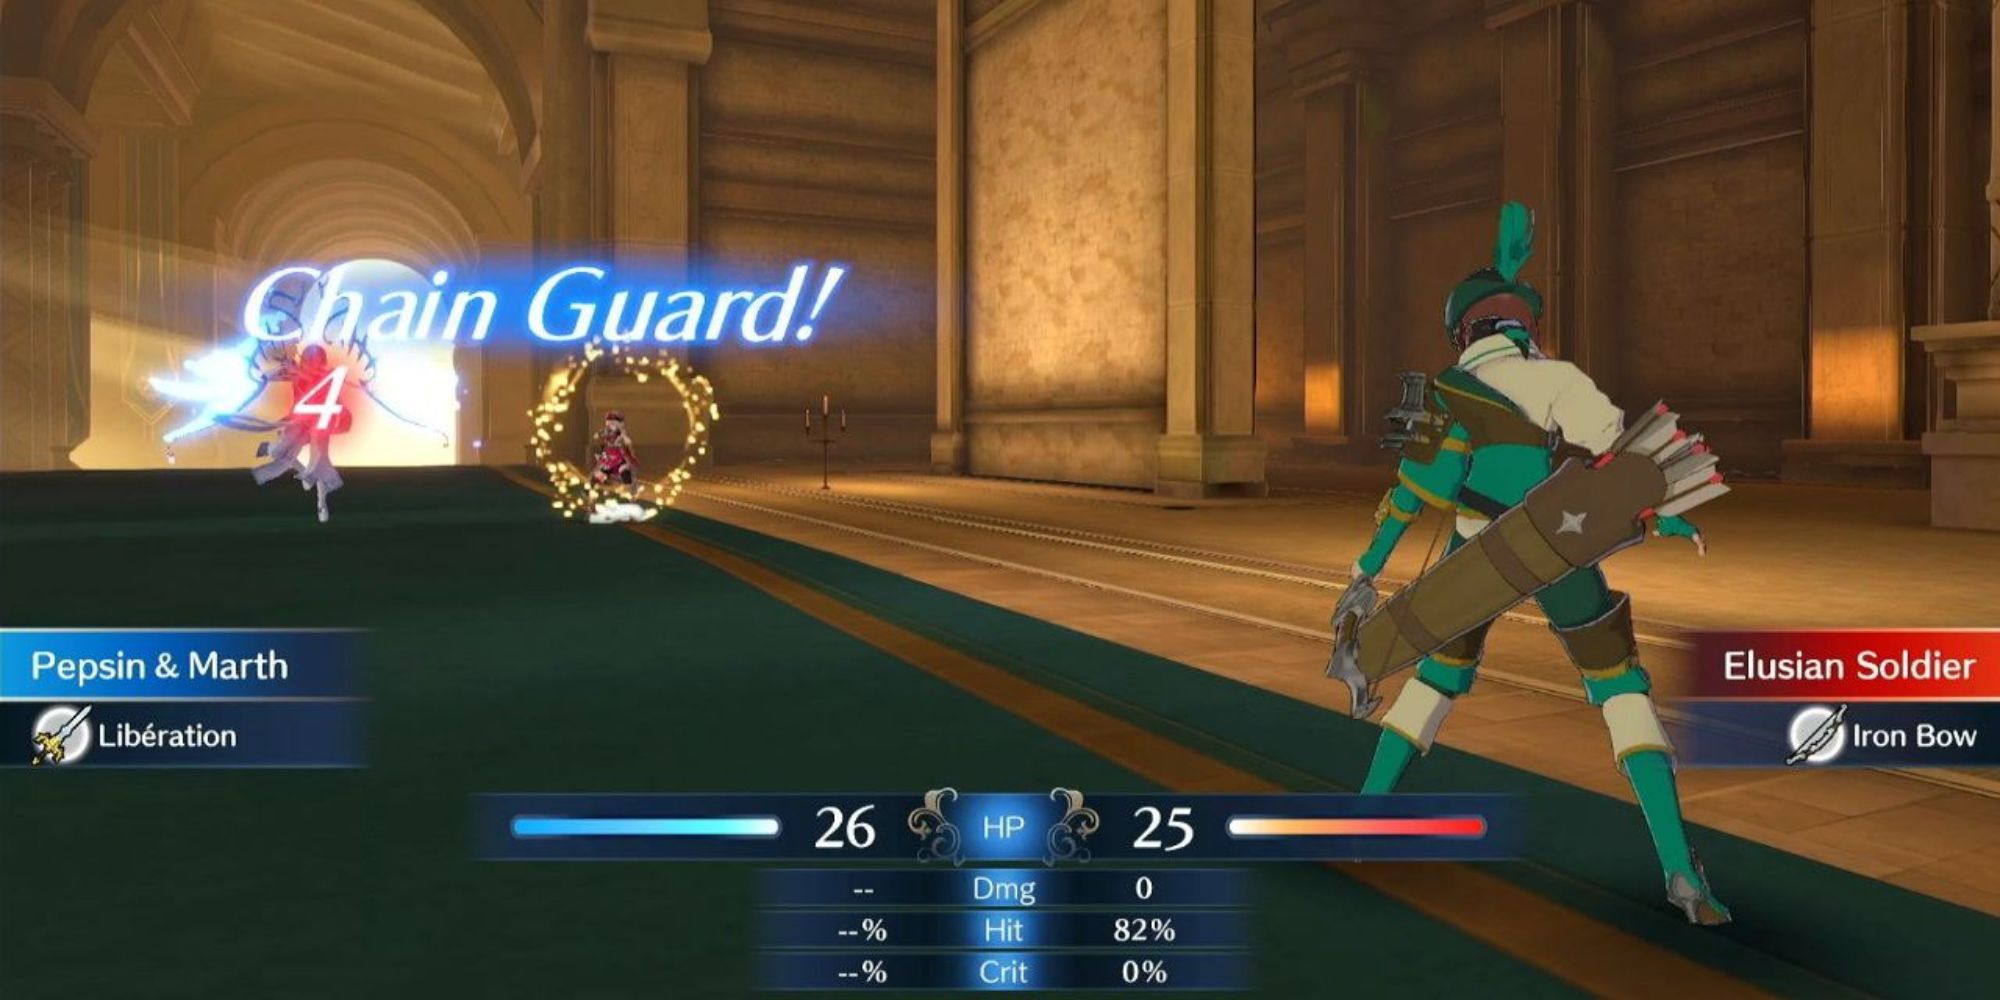 Fire Emblem Engage - Chain Guard being used in combat